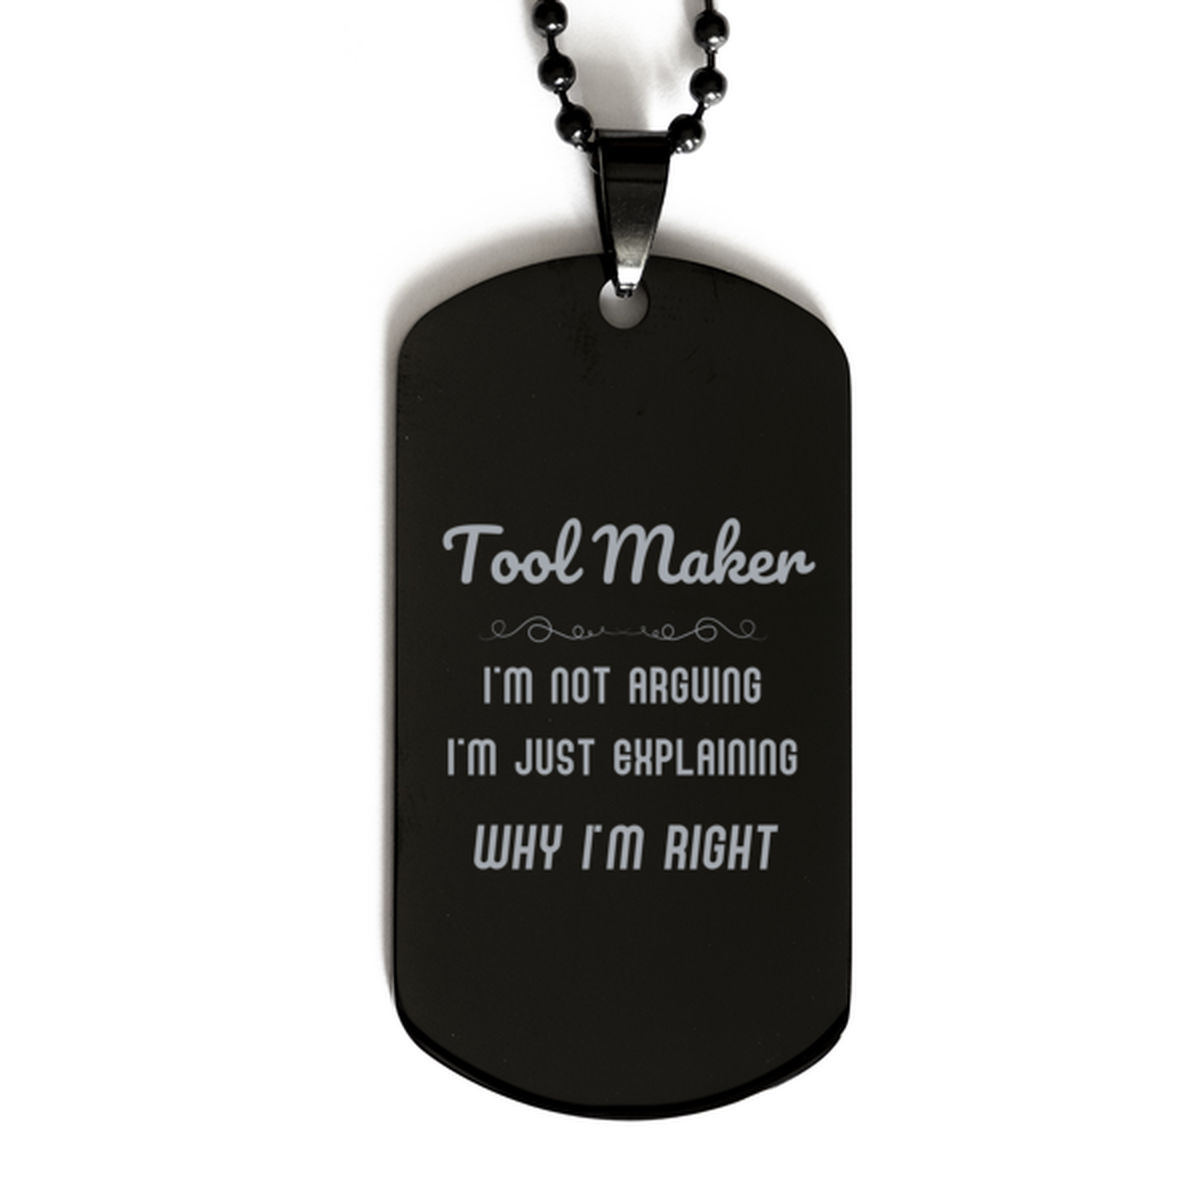 Tool Maker I'm not Arguing. I'm Just Explaining Why I'm RIGHT Black Dog Tag, Funny Saying Quote Tool Maker Gifts For Tool Maker Graduation Birthday Christmas Gifts for Men Women Coworker